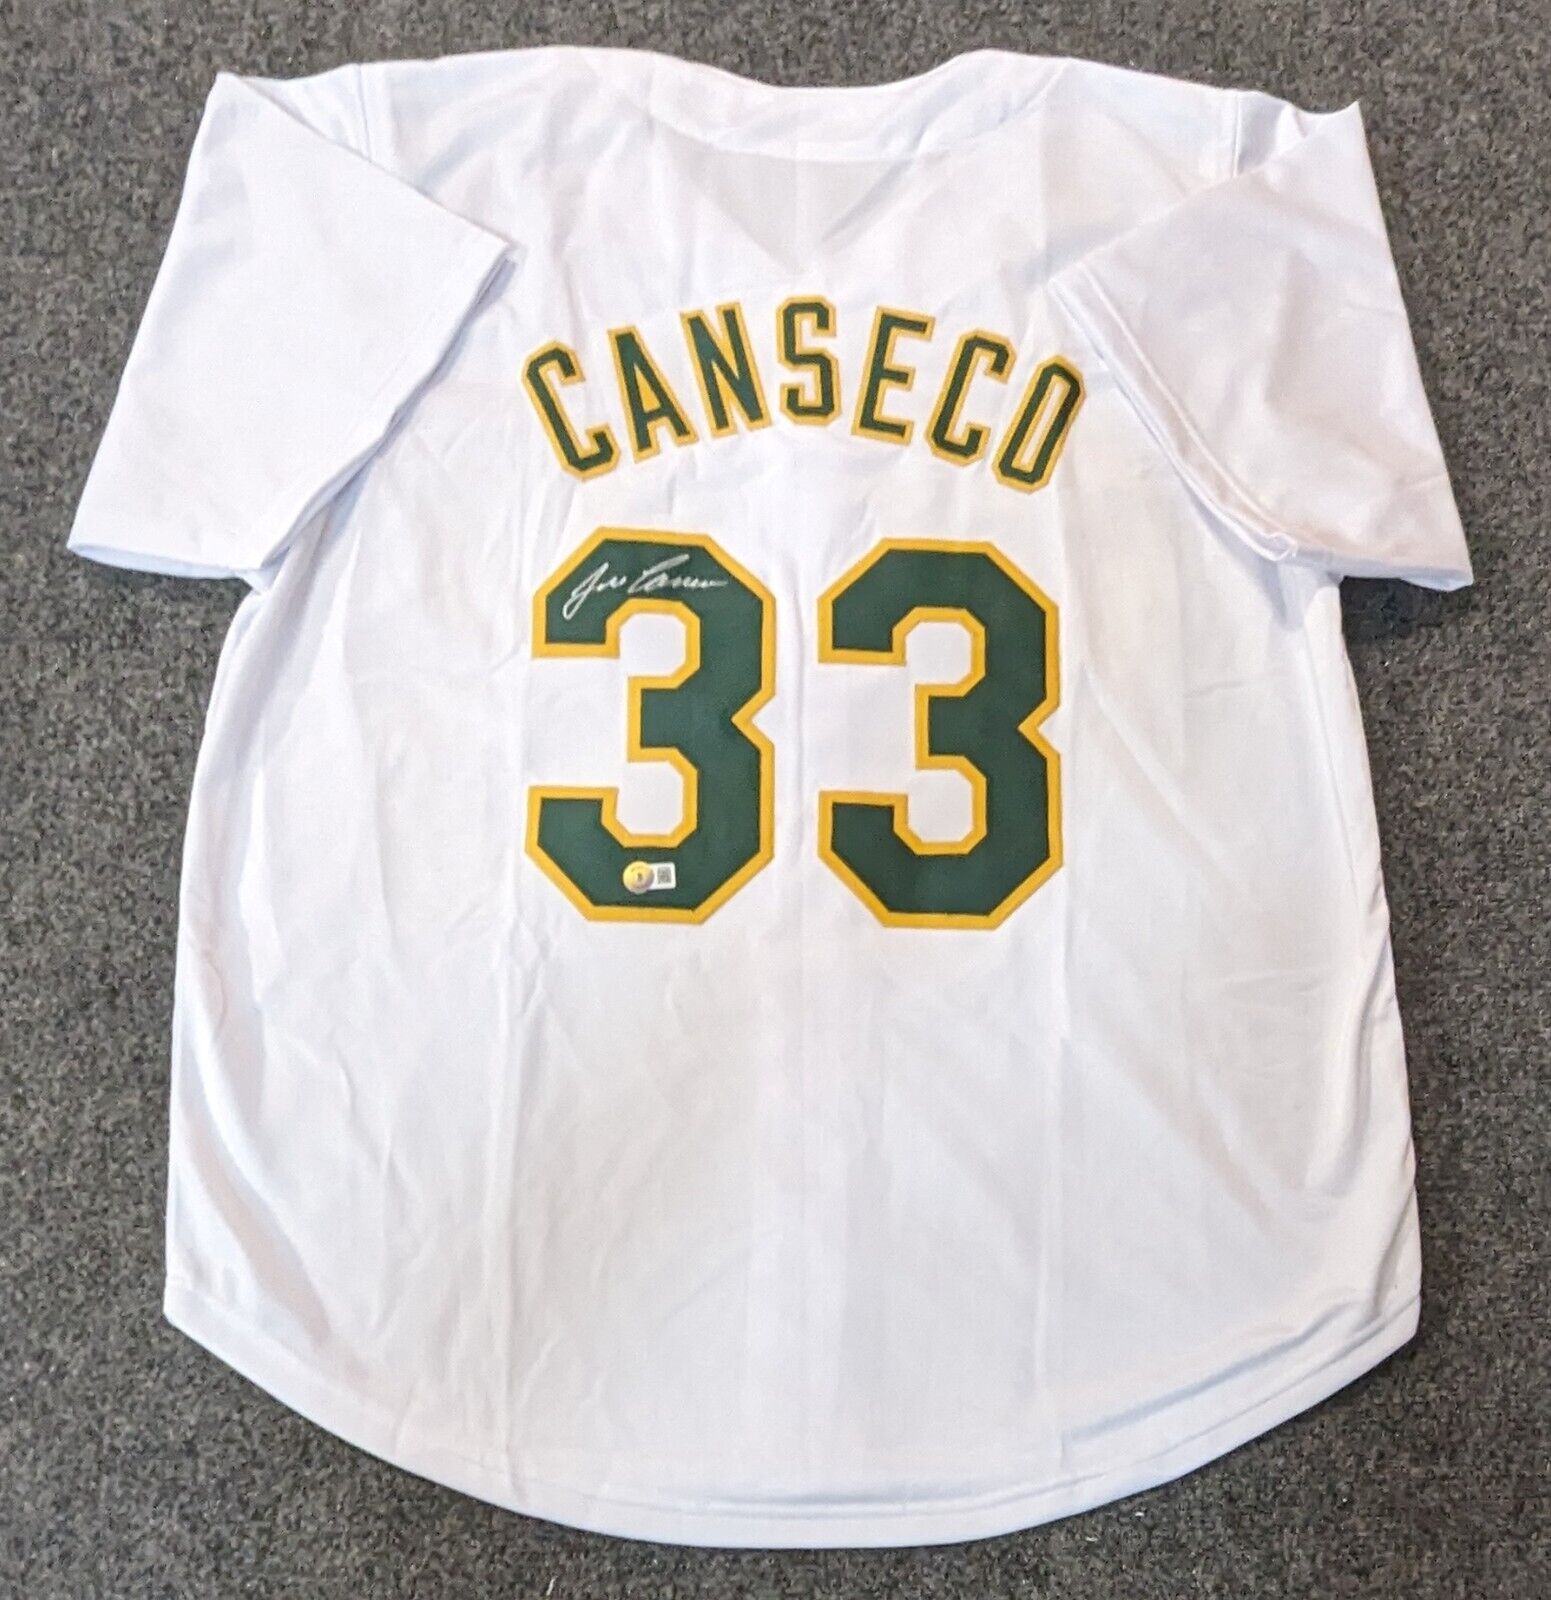 Jose Canseco signed 1986 Oakland Athletics Cooperstown Gold Throwback Jersey